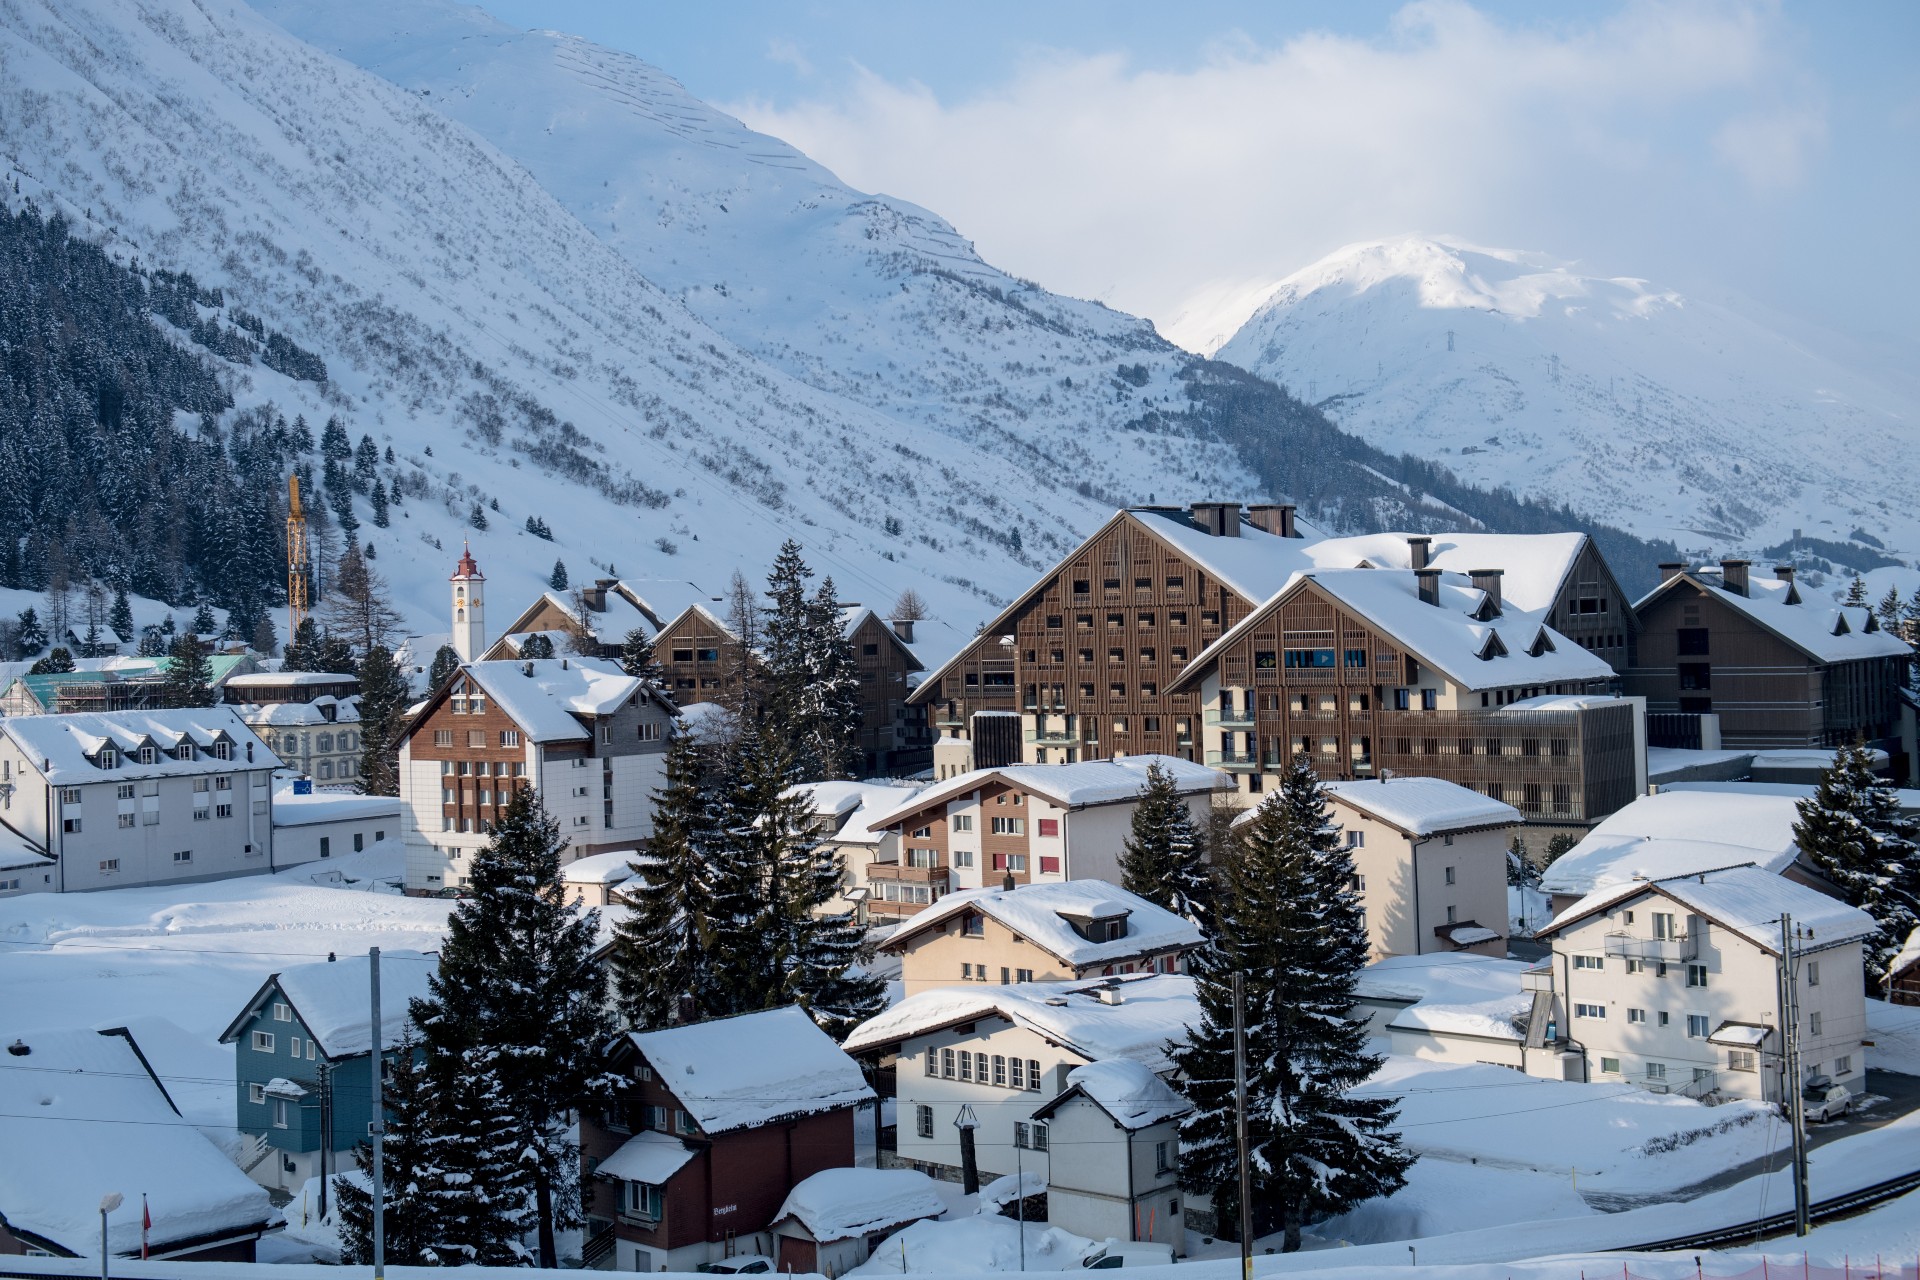 A Group Of Buildings In A Snowy Area With Mountains In The Background